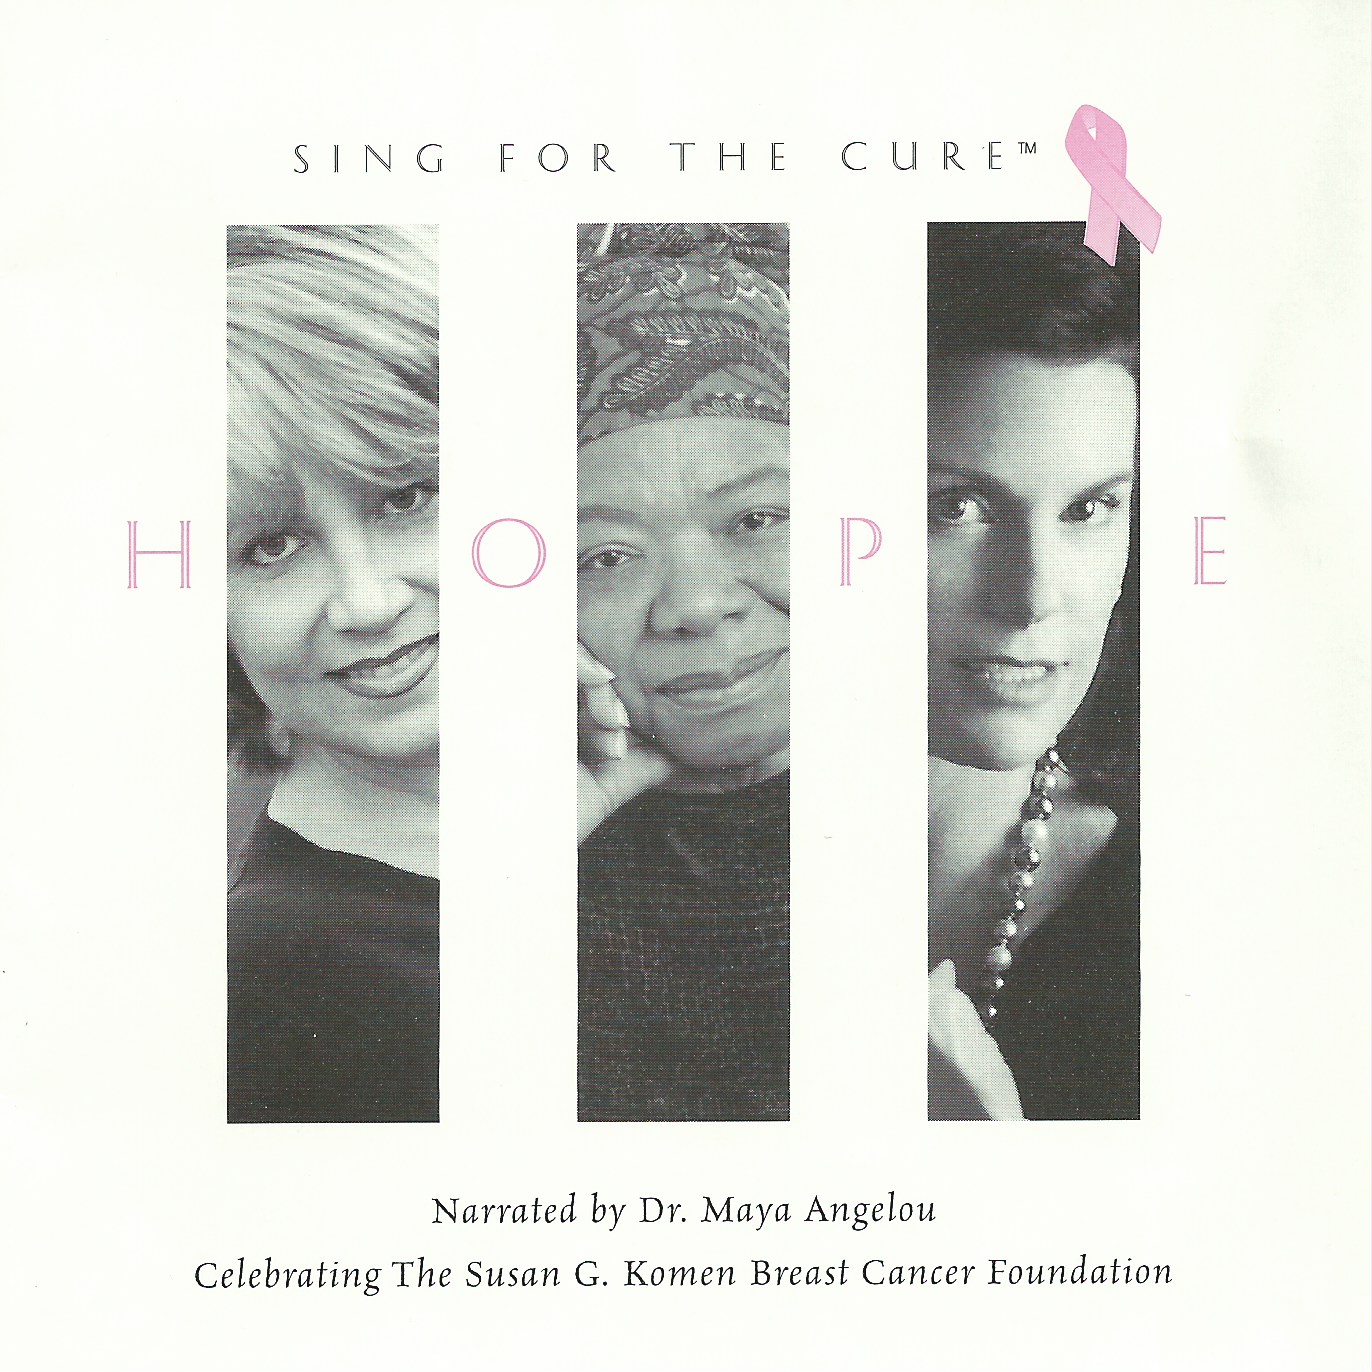 Sing for the Cure, Vol. 2